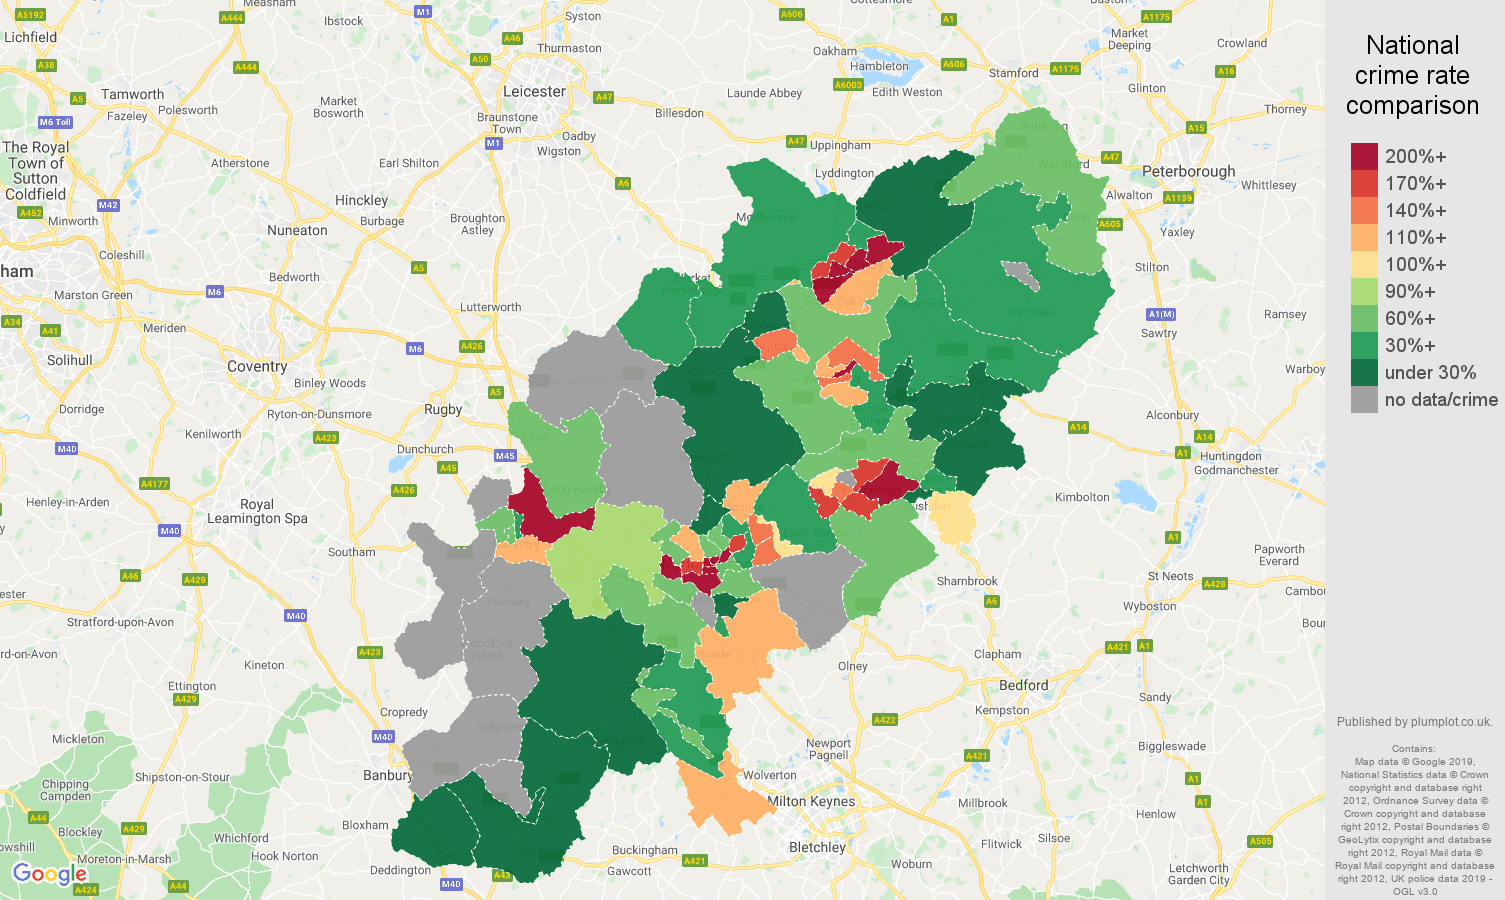 Northamptonshire possession of weapons crime rate comparison map